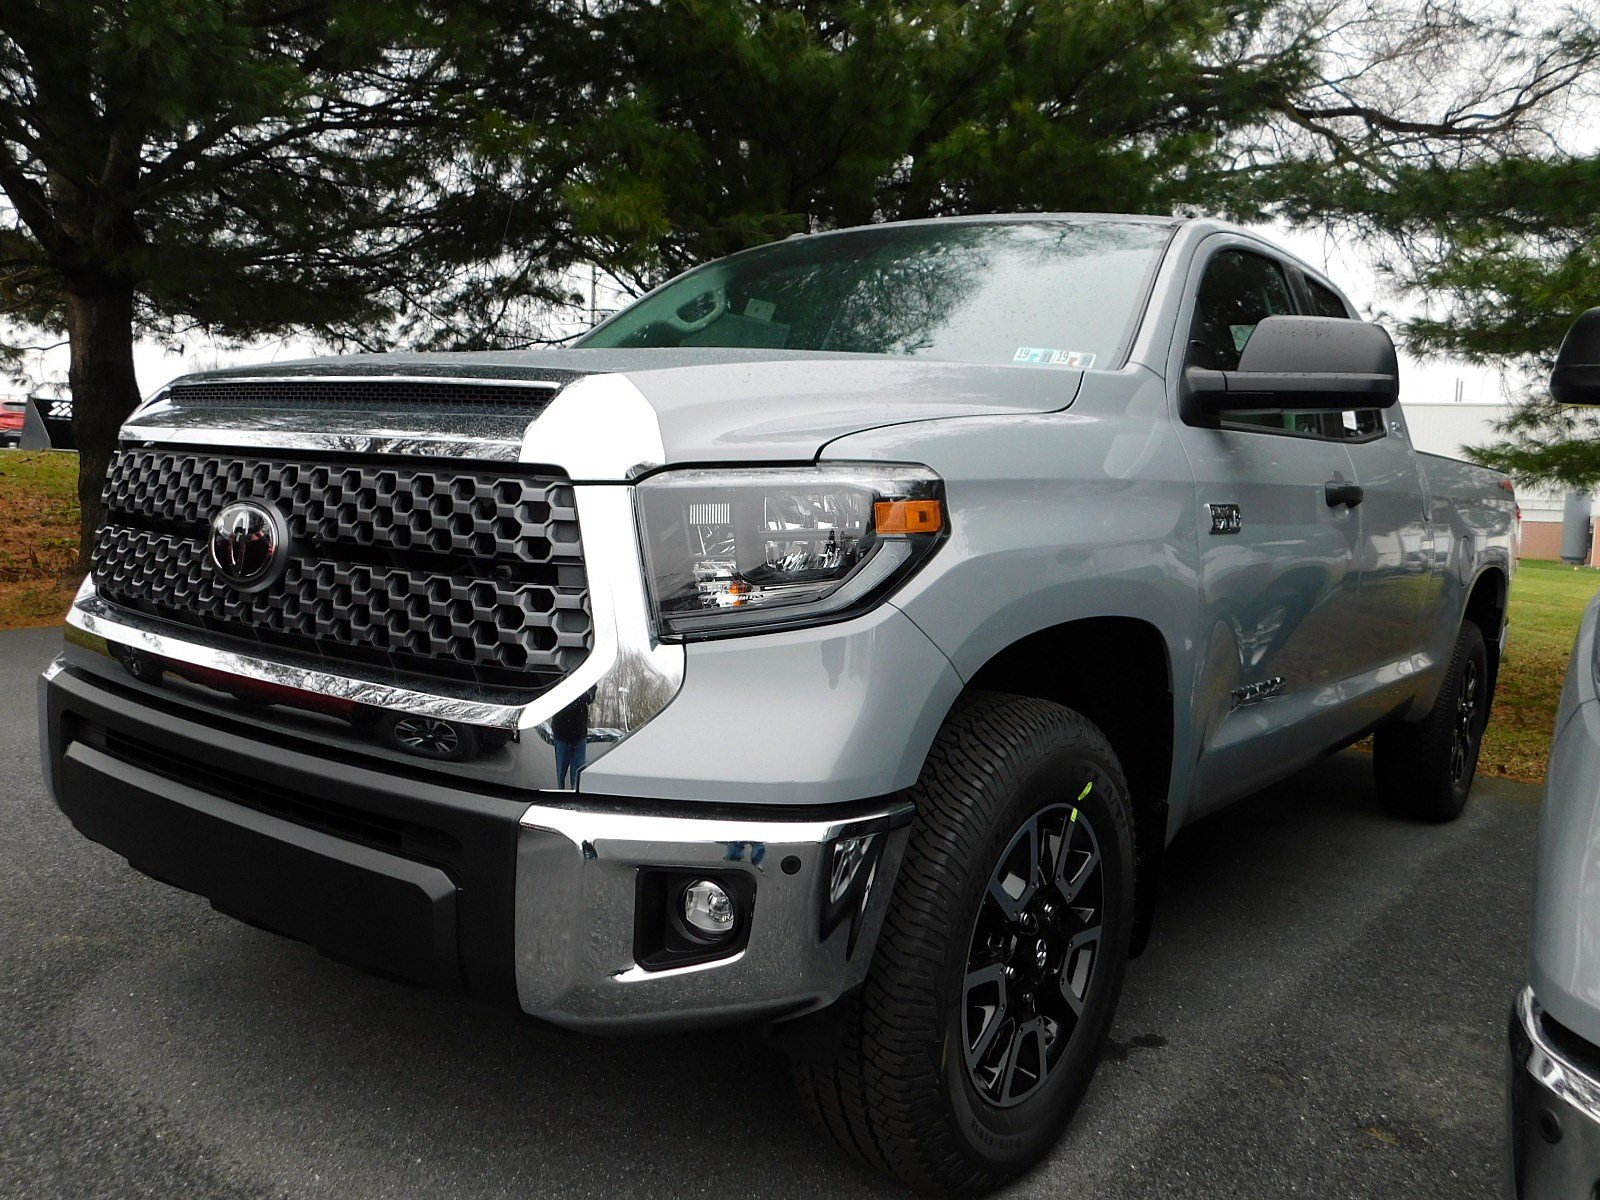 New 2019 Toyota Tundra SR5 Double Cab in East Petersburg #11838